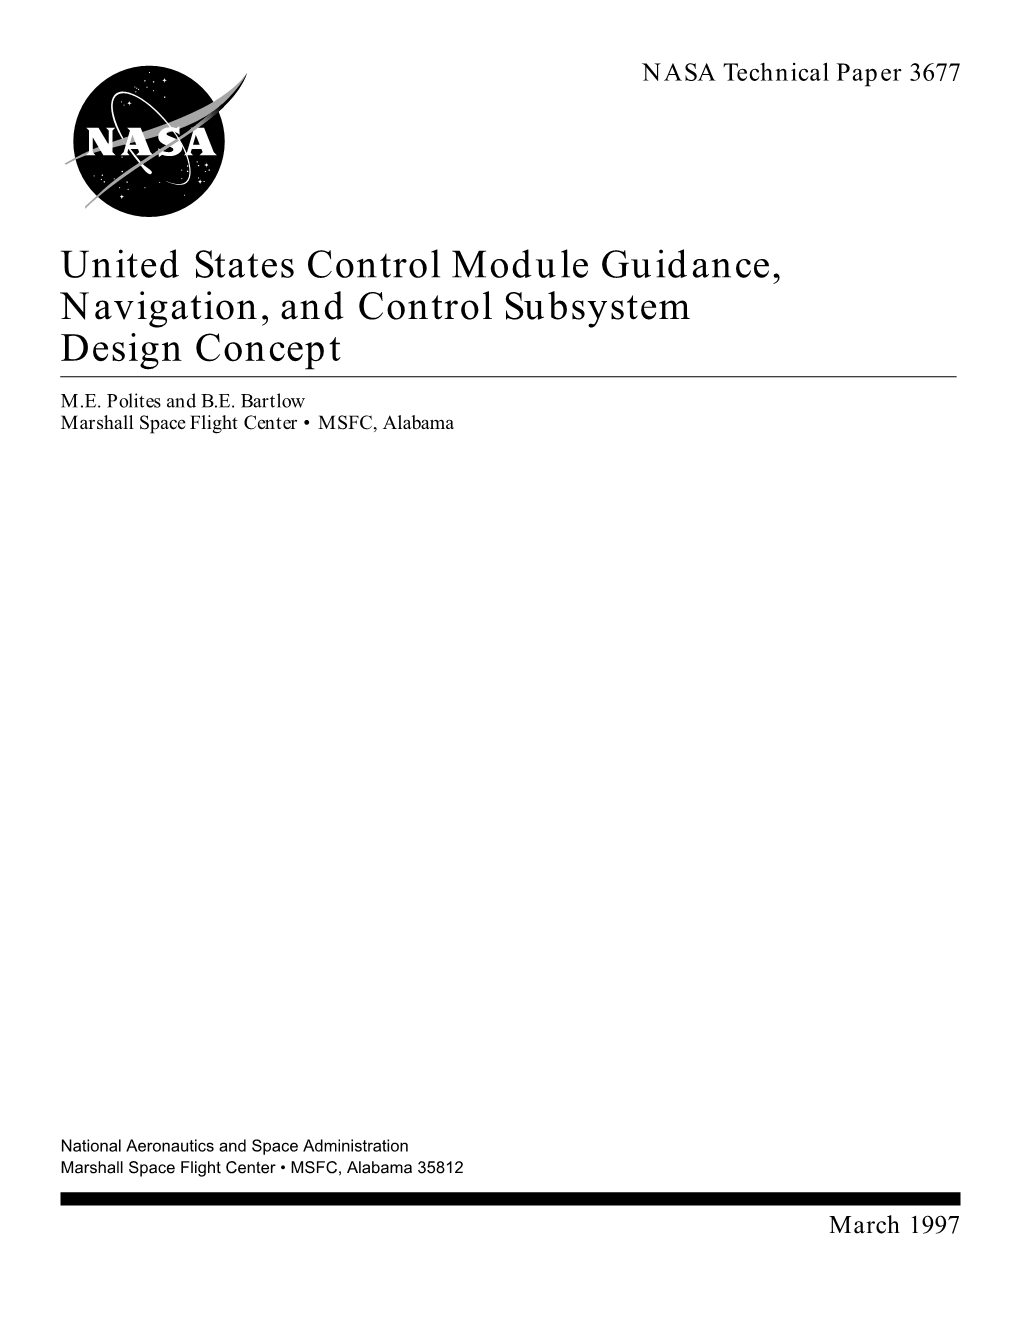 United States Control Module Guidance, Navigation, and Control Subsystem Design Concept